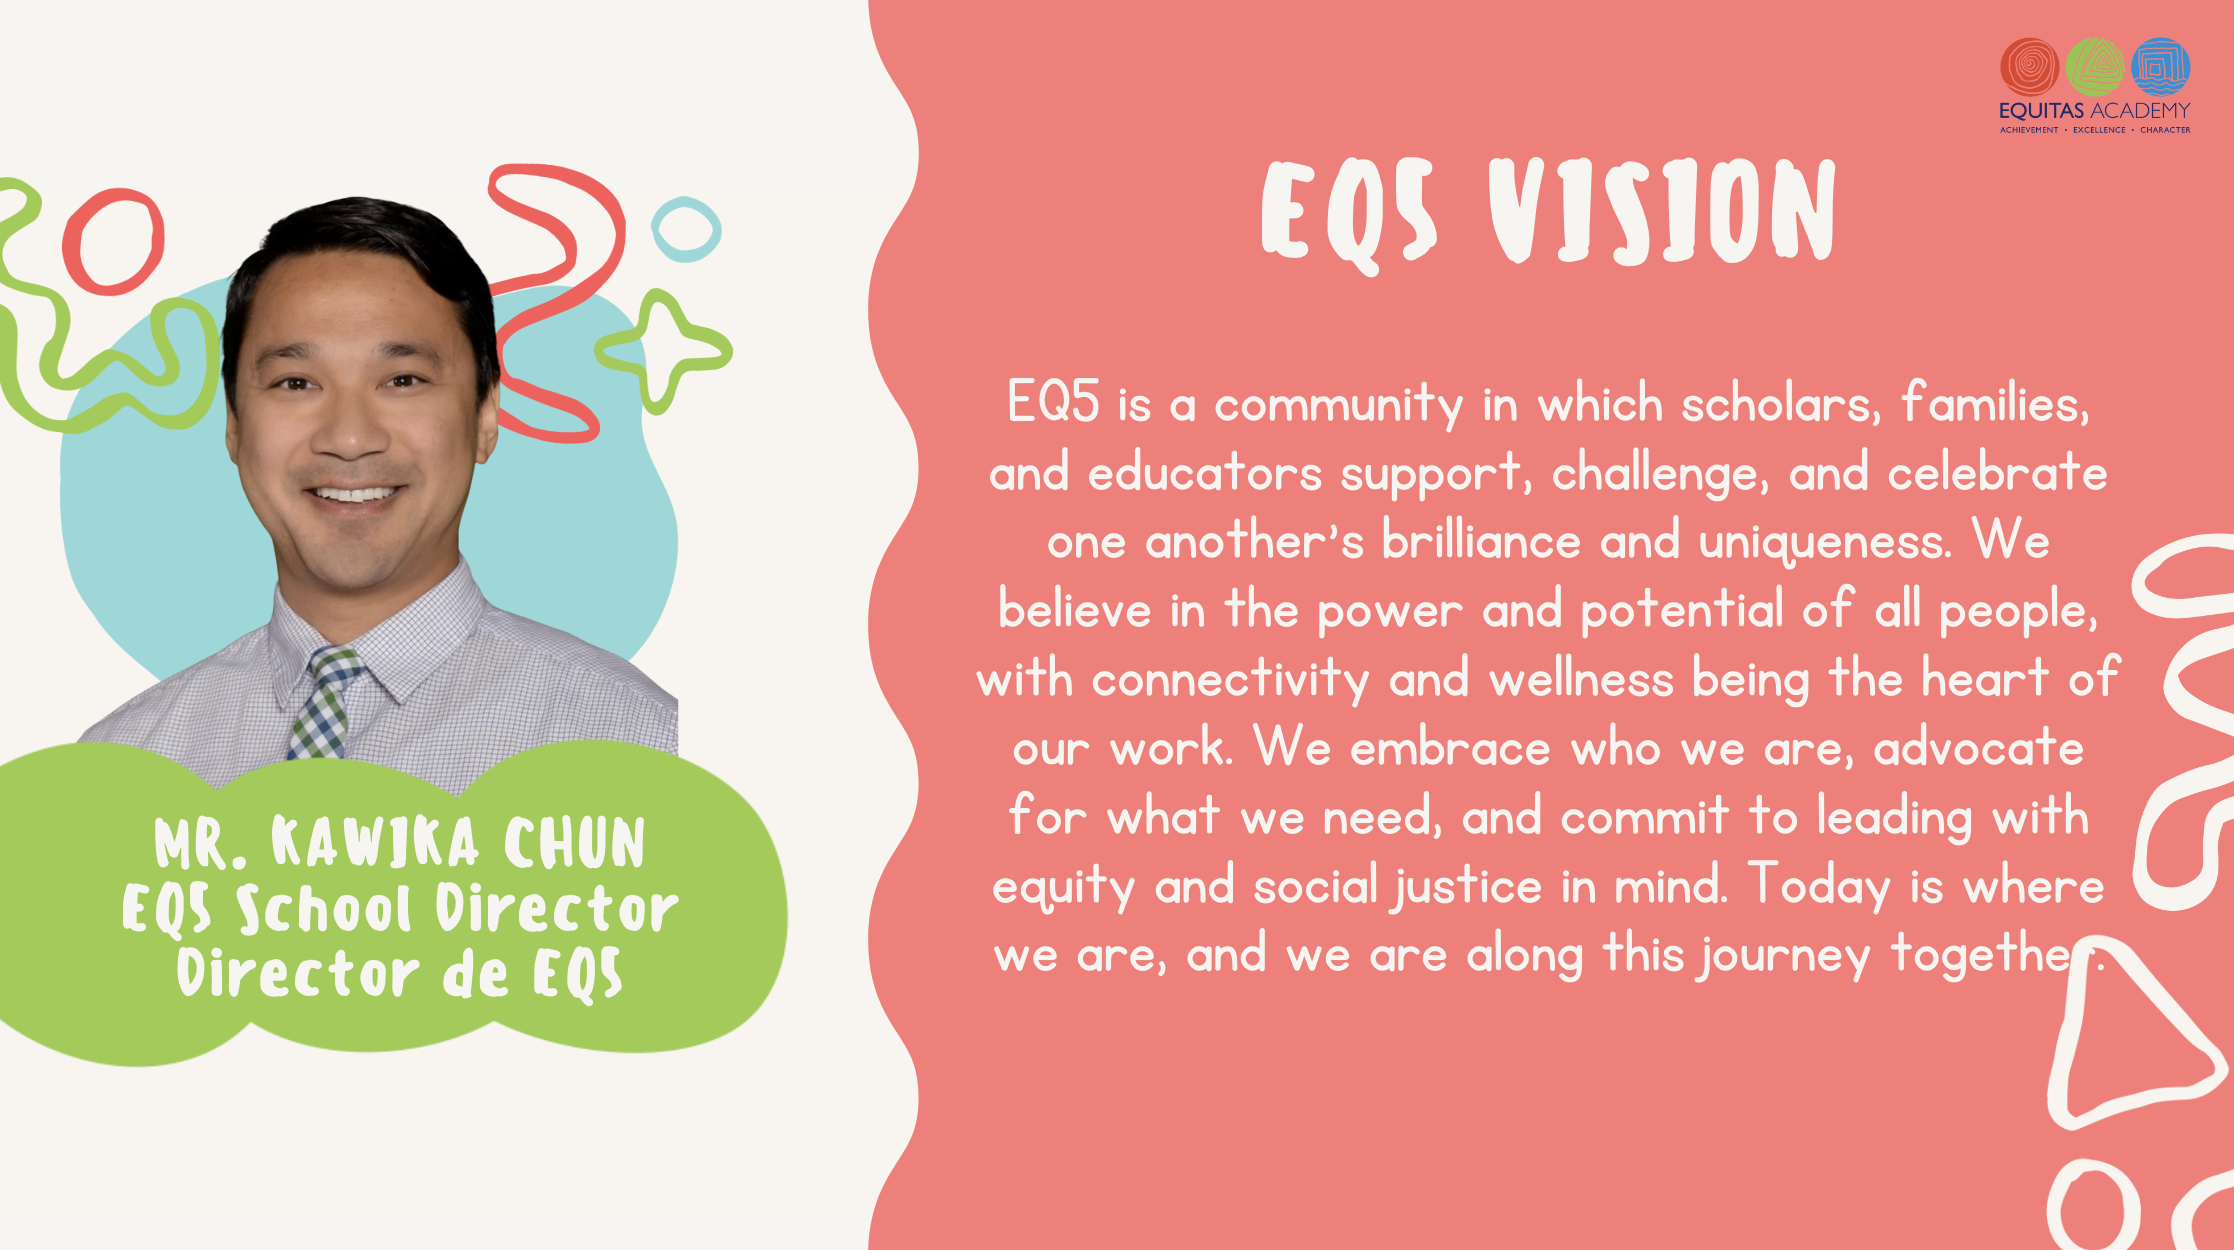 EQ5 is a community in which scholars, families, and educators support, challenge, and celebrate one another’s brilliance and uniqueness.